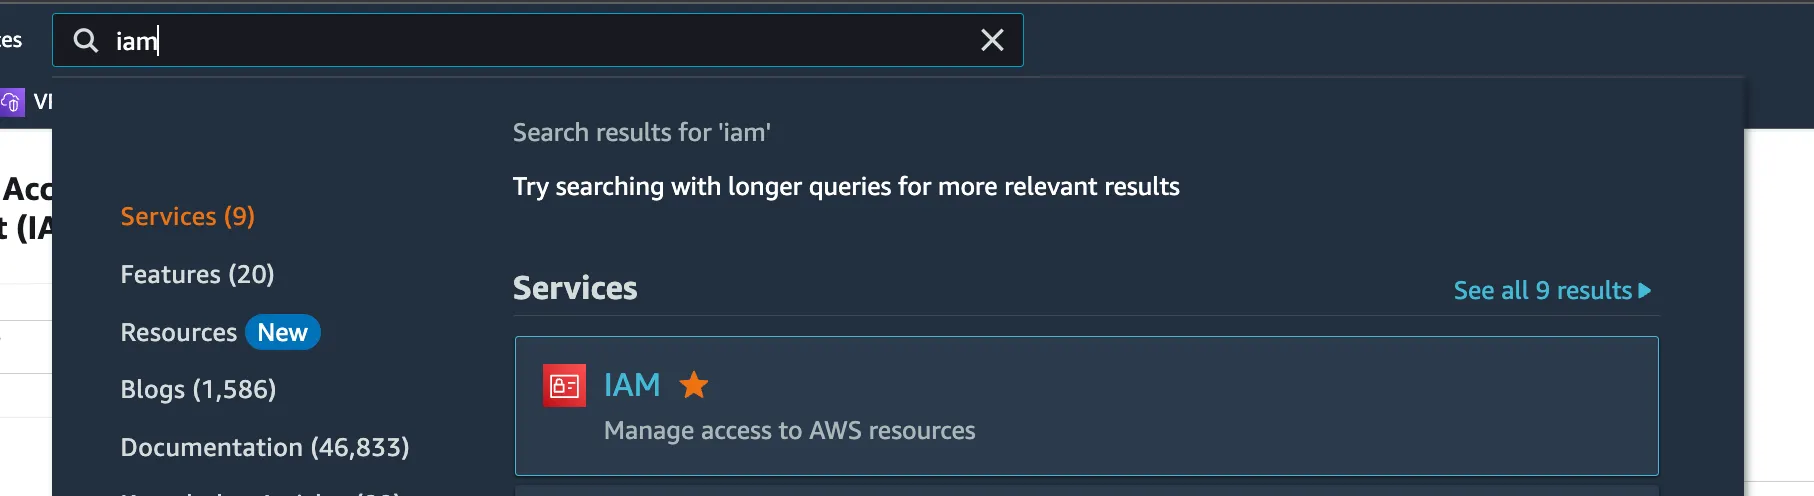 aws-iam-search-result